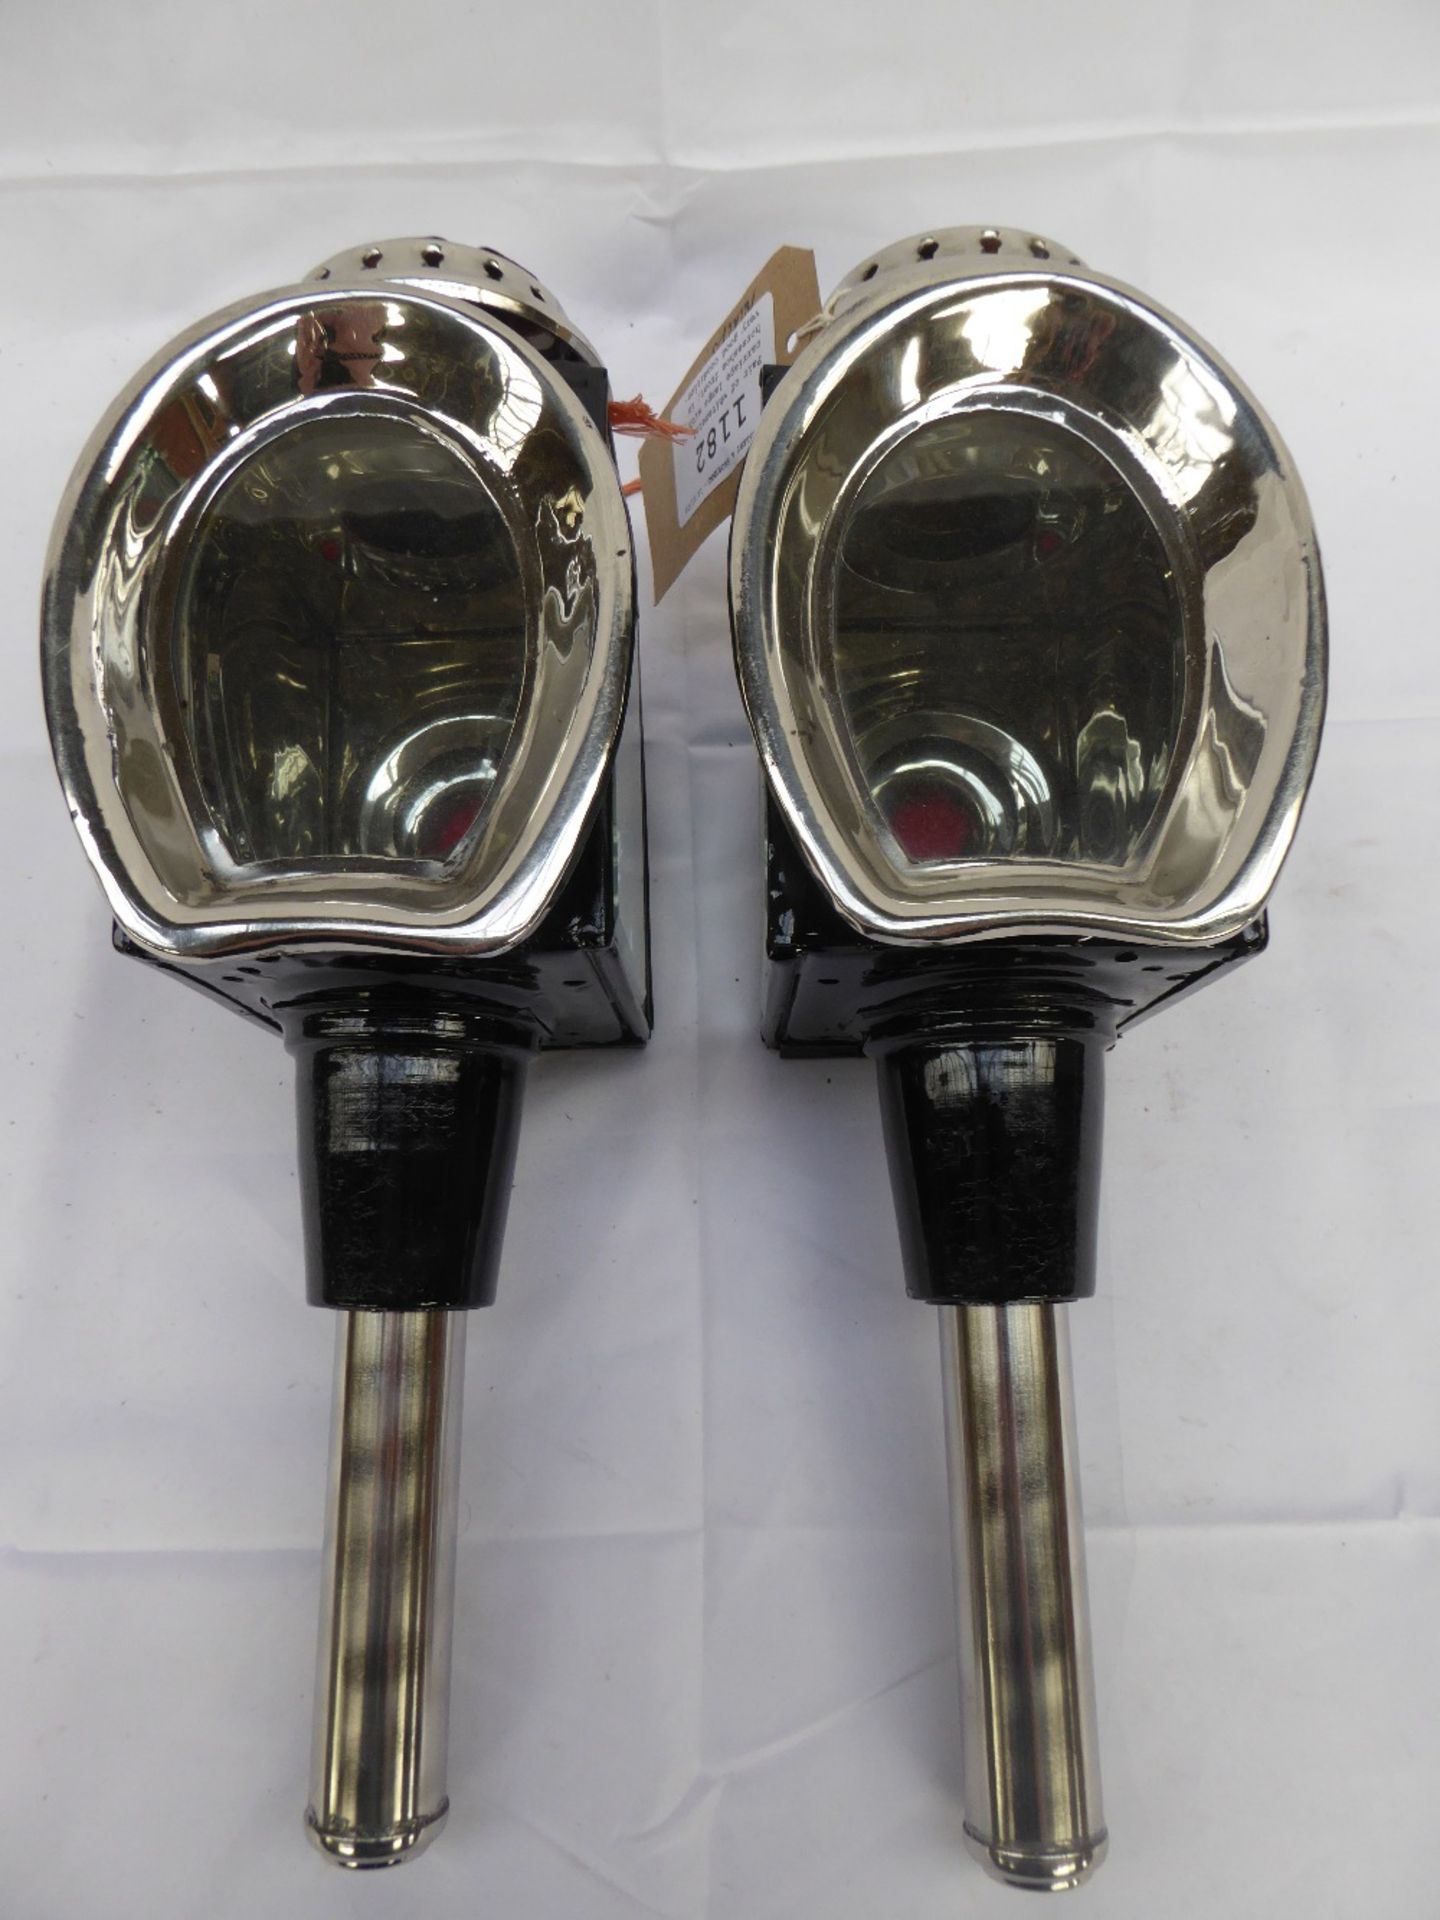 Pair of whitemetal carriage lamps with horseshoe front;